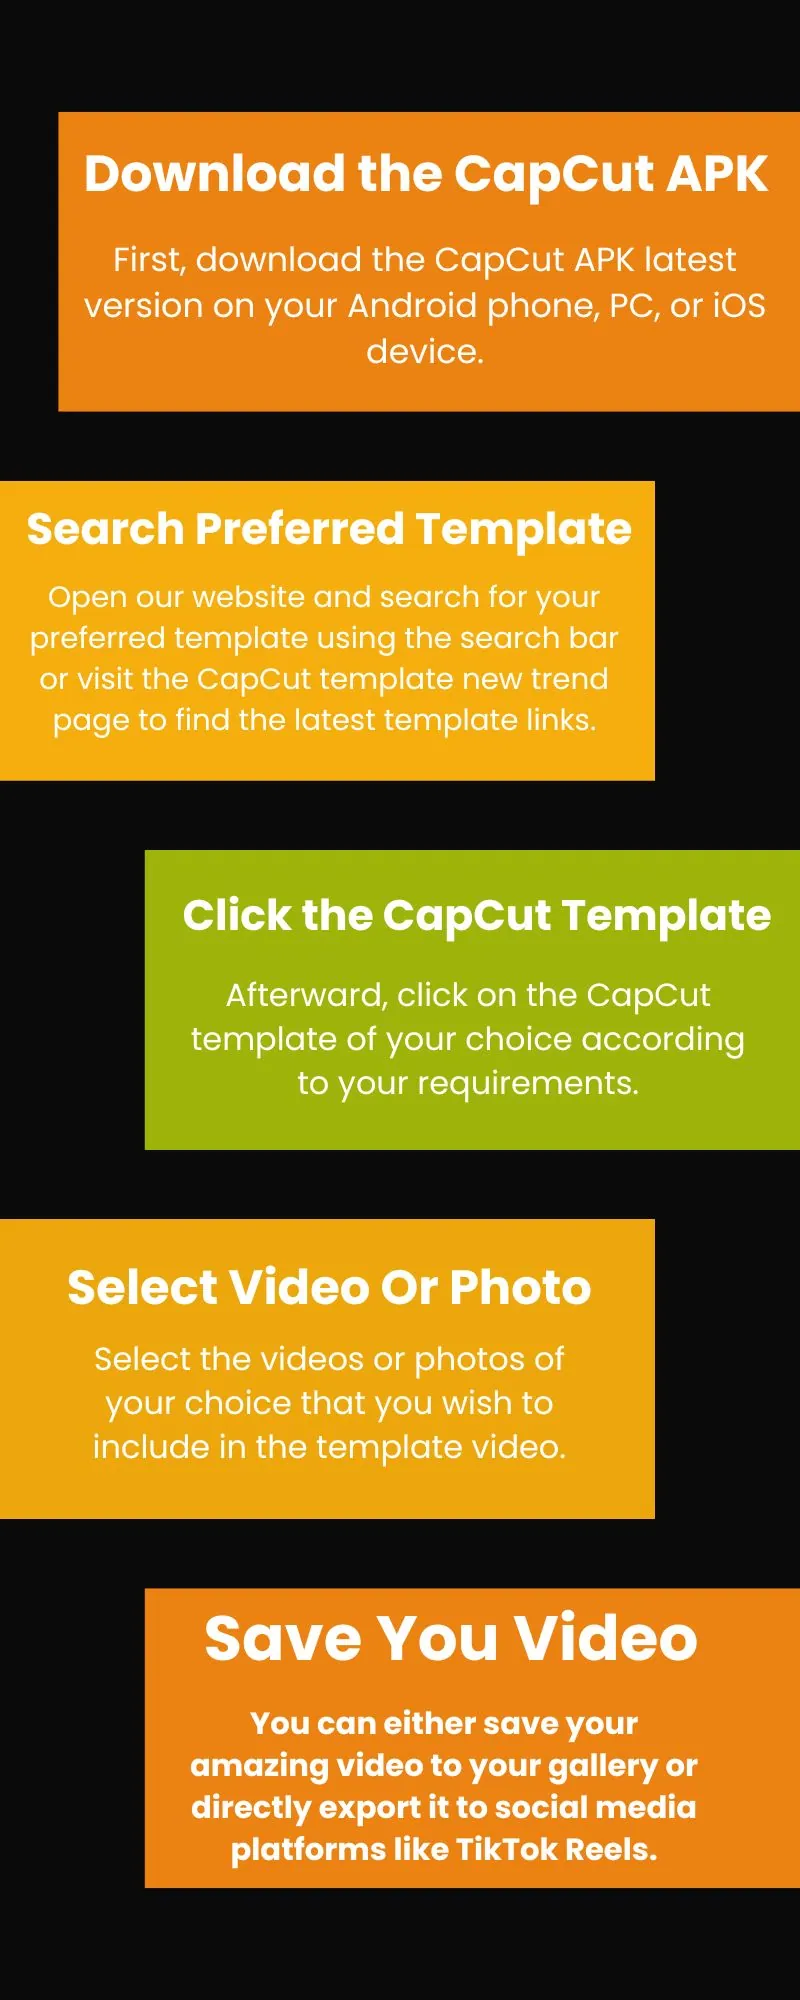 How to Use and Download CapCut Template New Trend